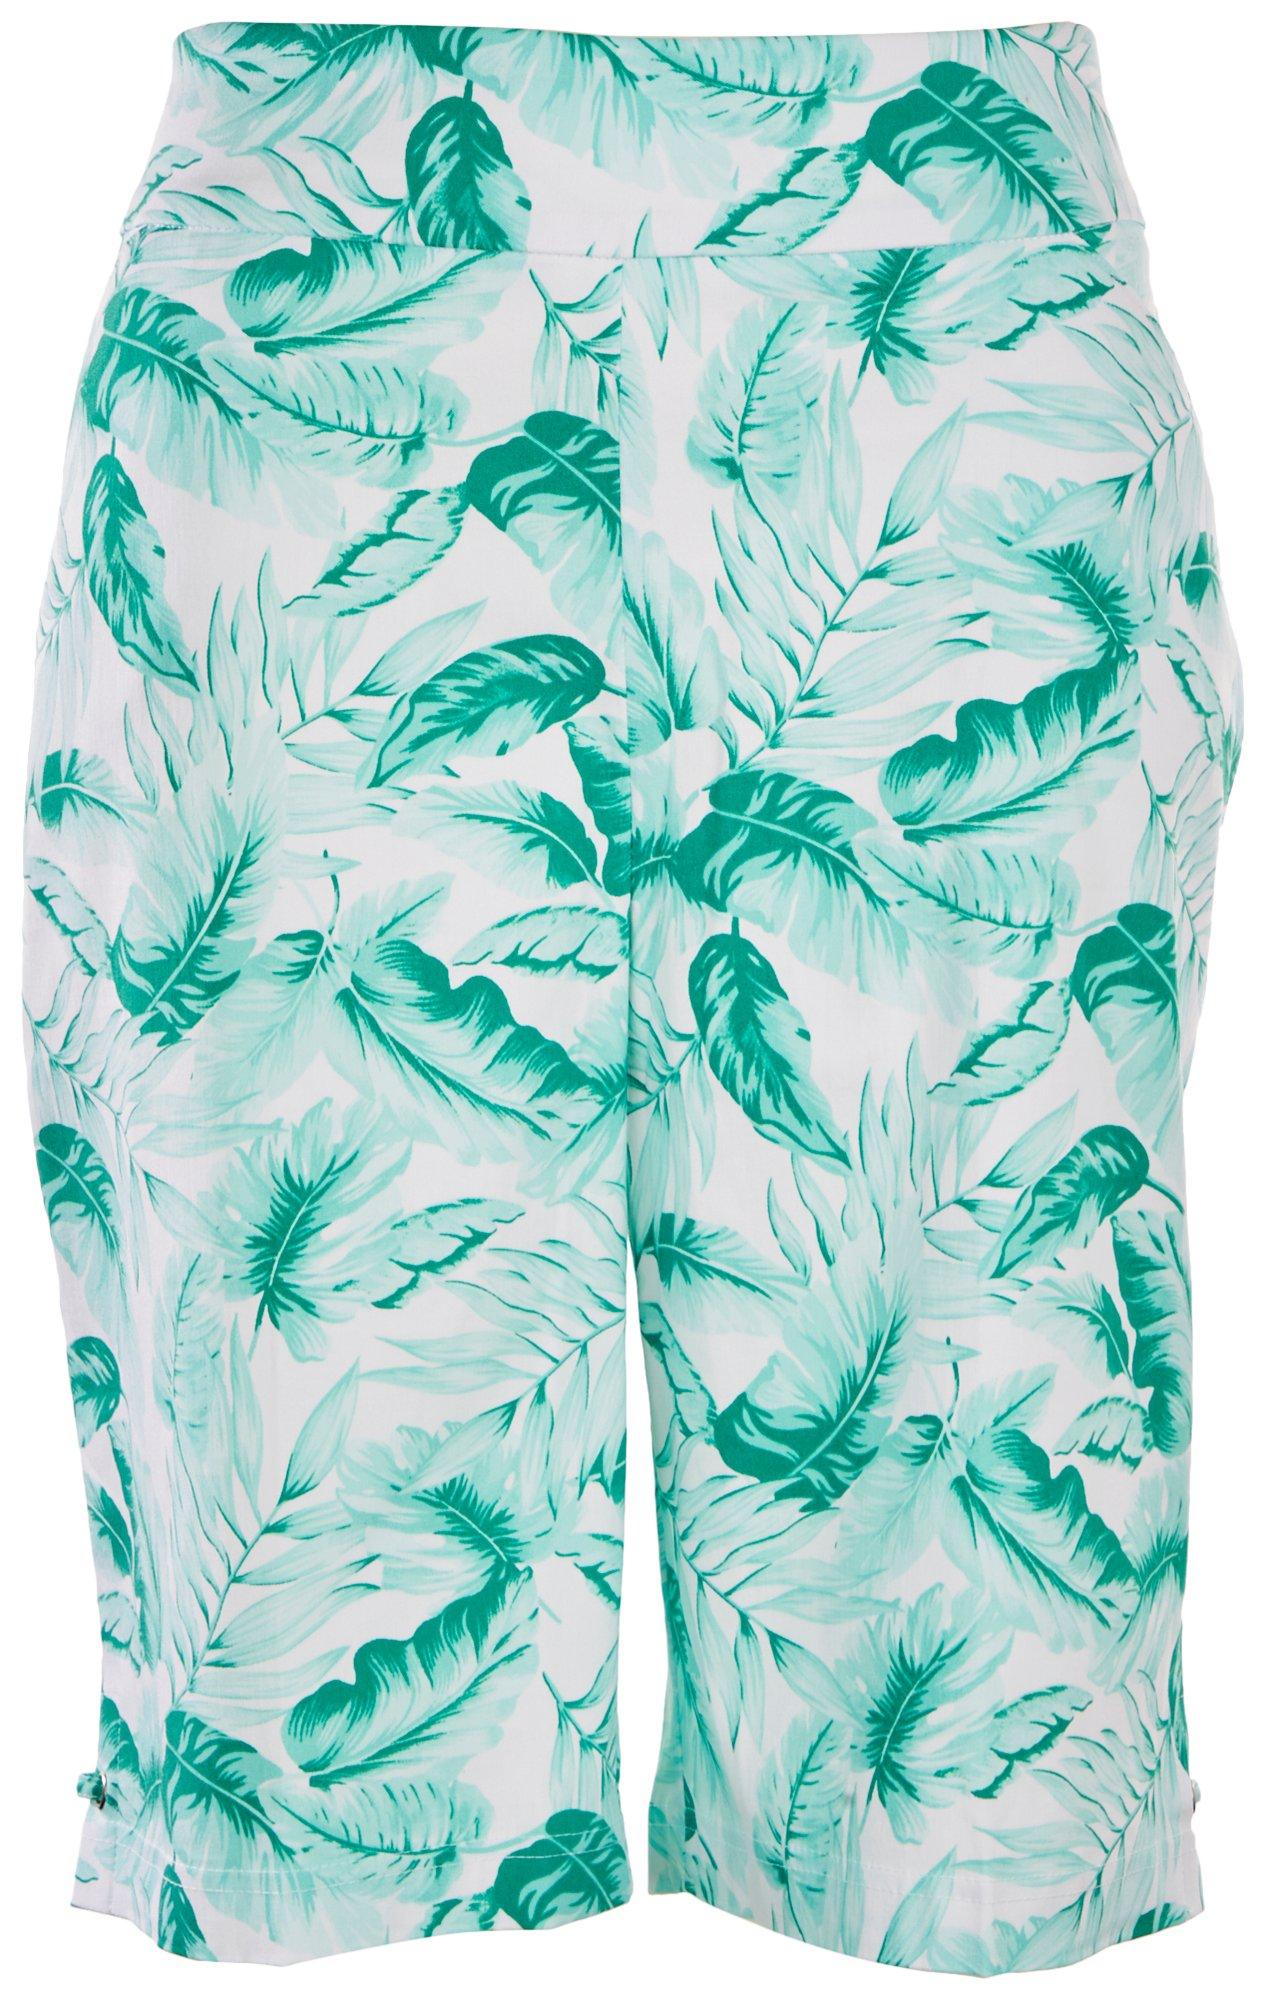 Plus 11 in. Fronds Print Grommet With Tab Shorts